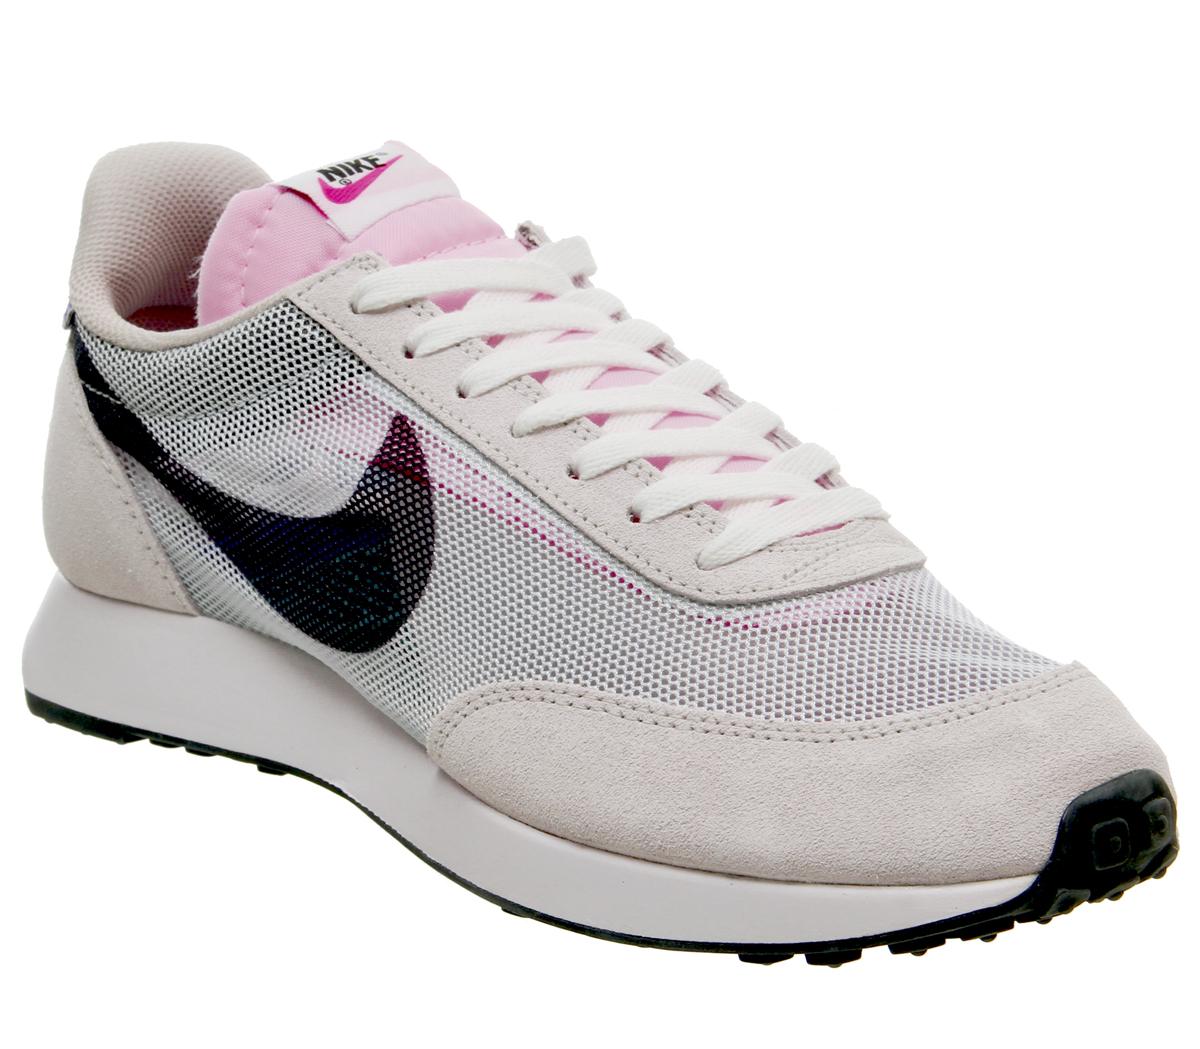 nike air tailwind 79 true to size